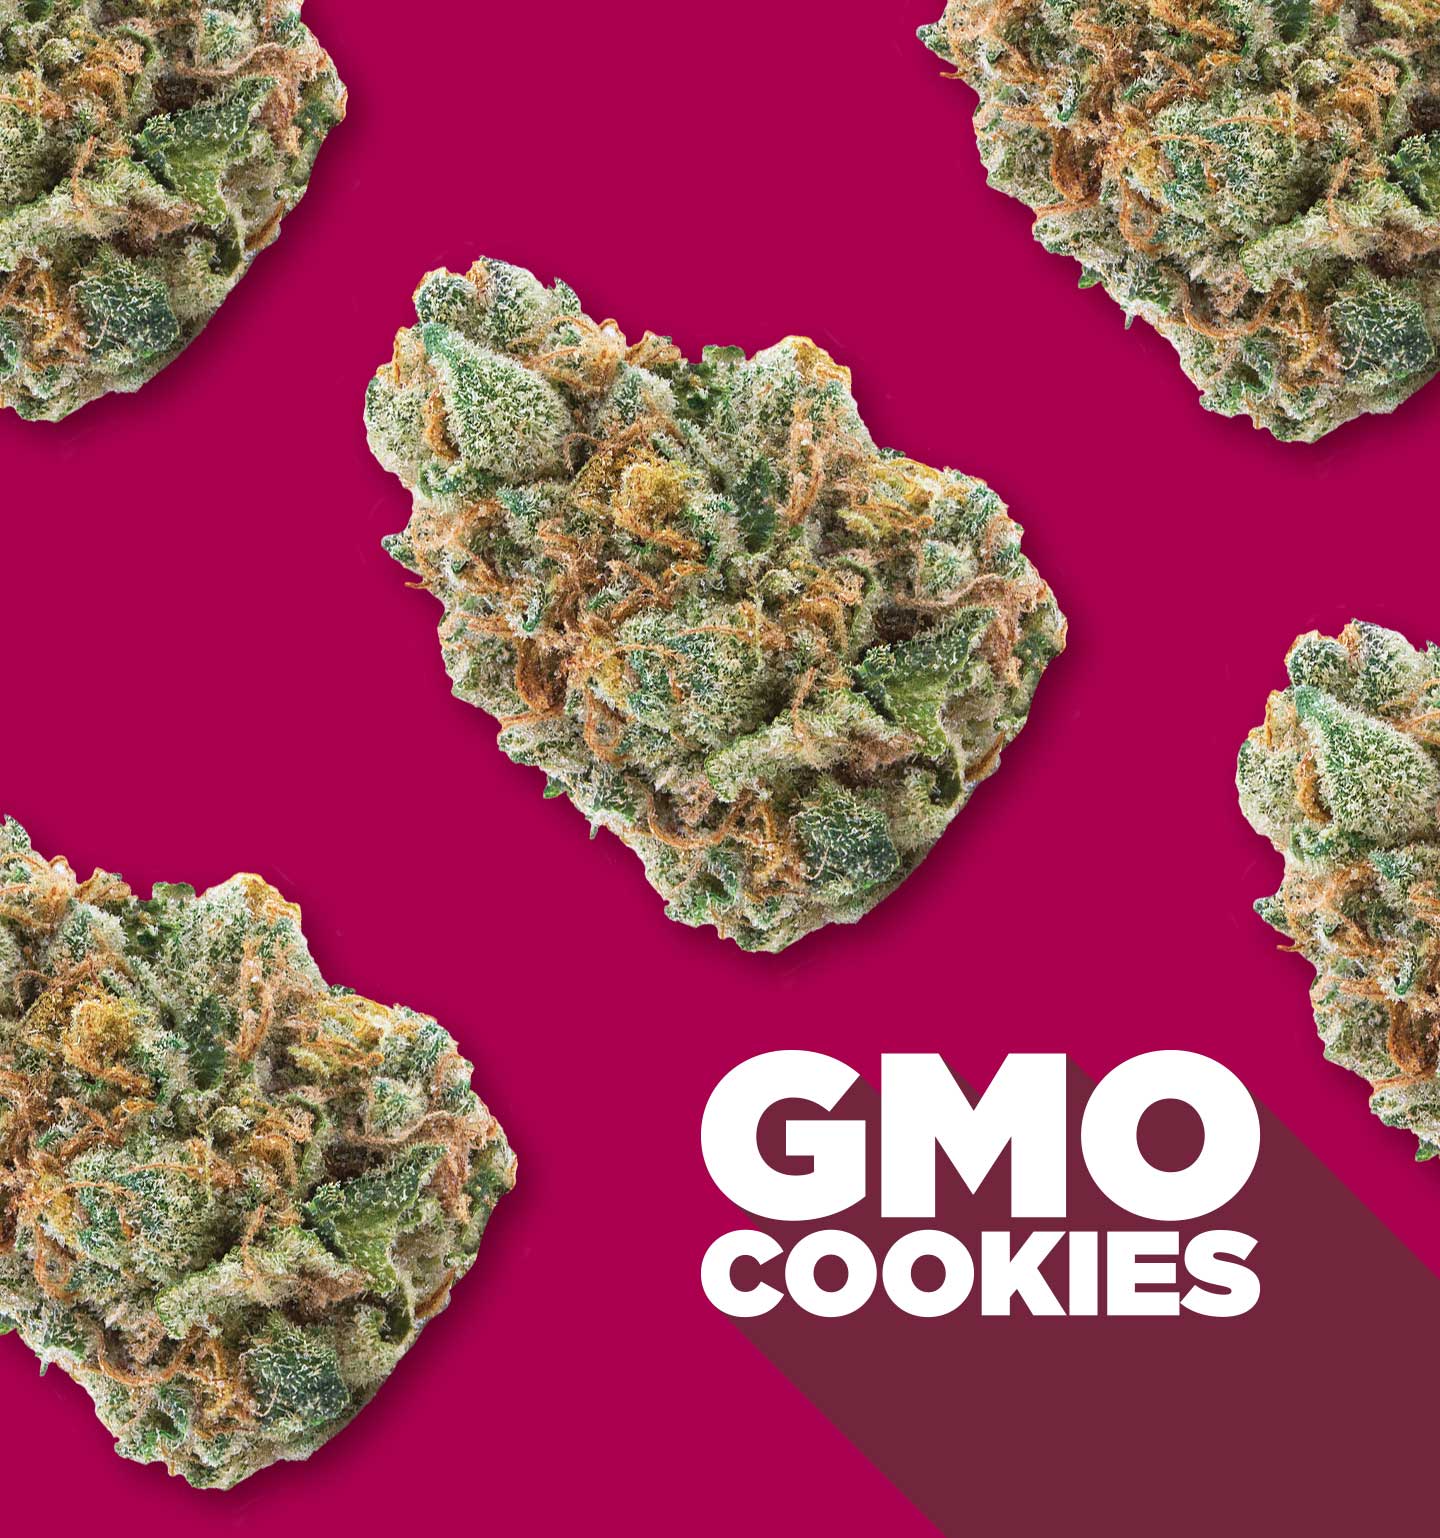 GMO Cookies with nugs